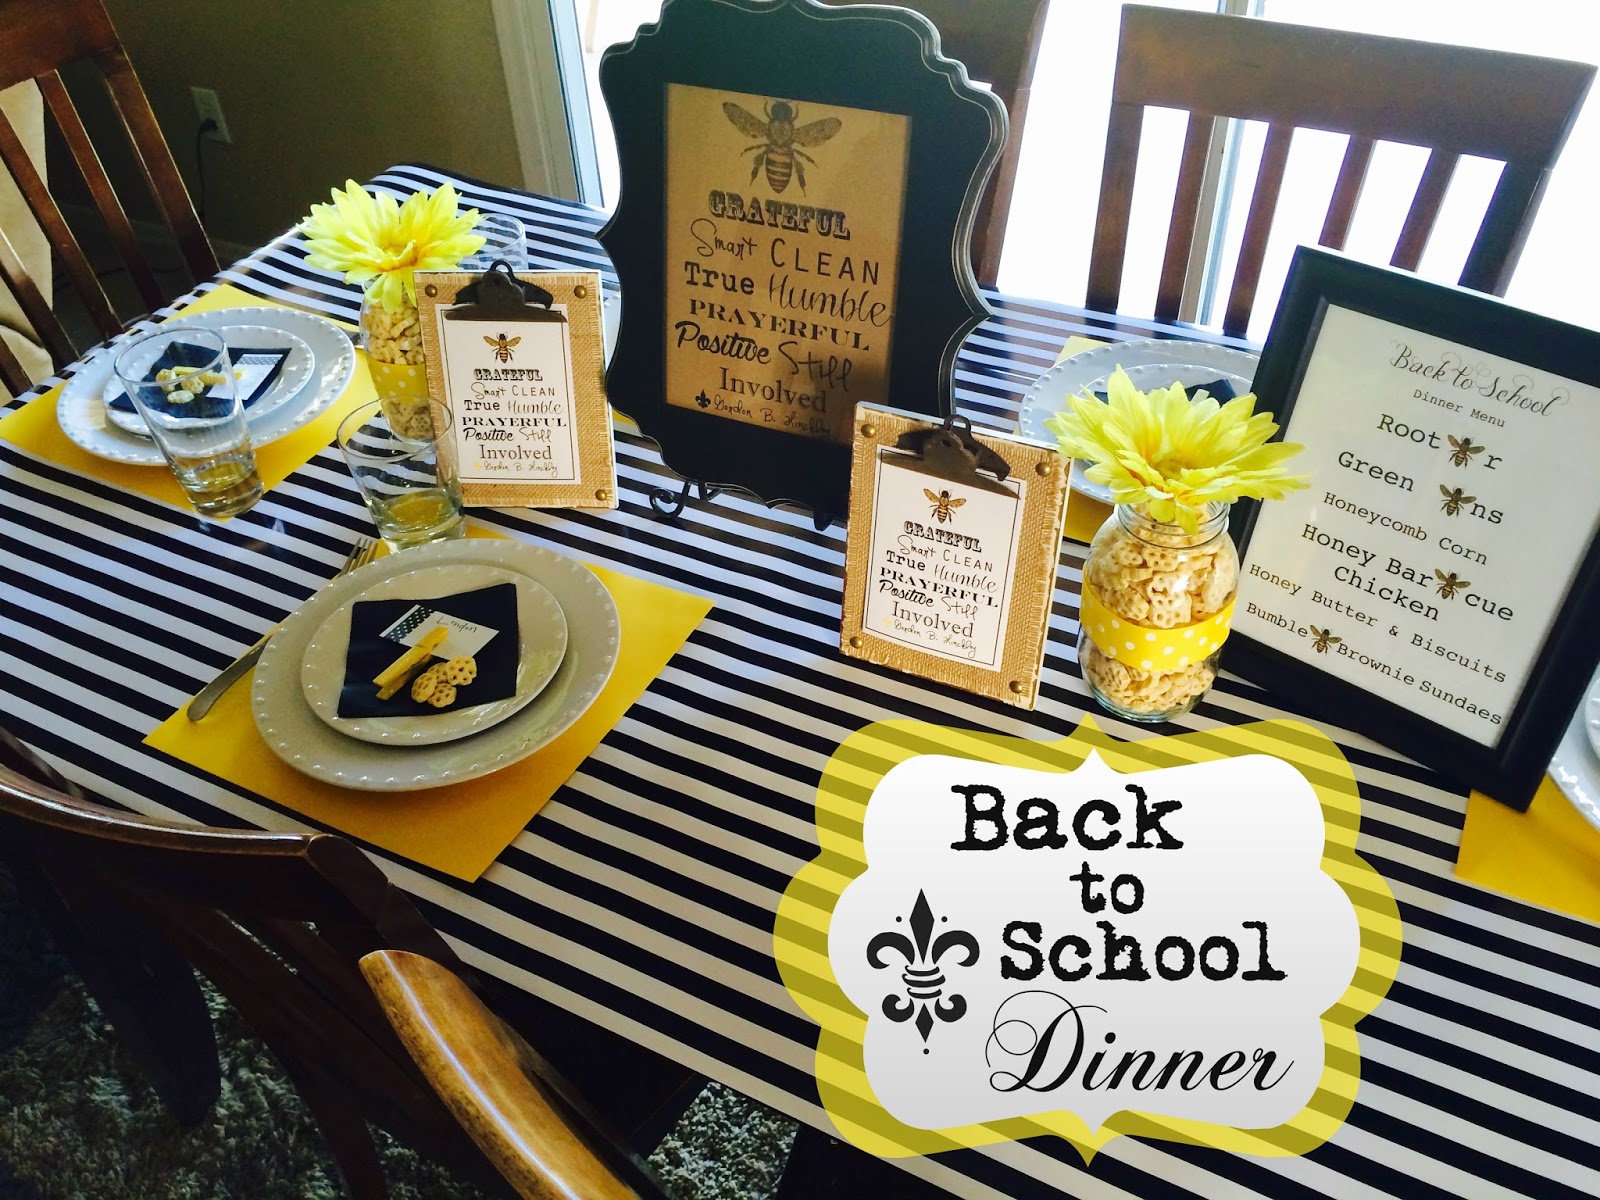 Our 2015 Annual Back to School Dinner.